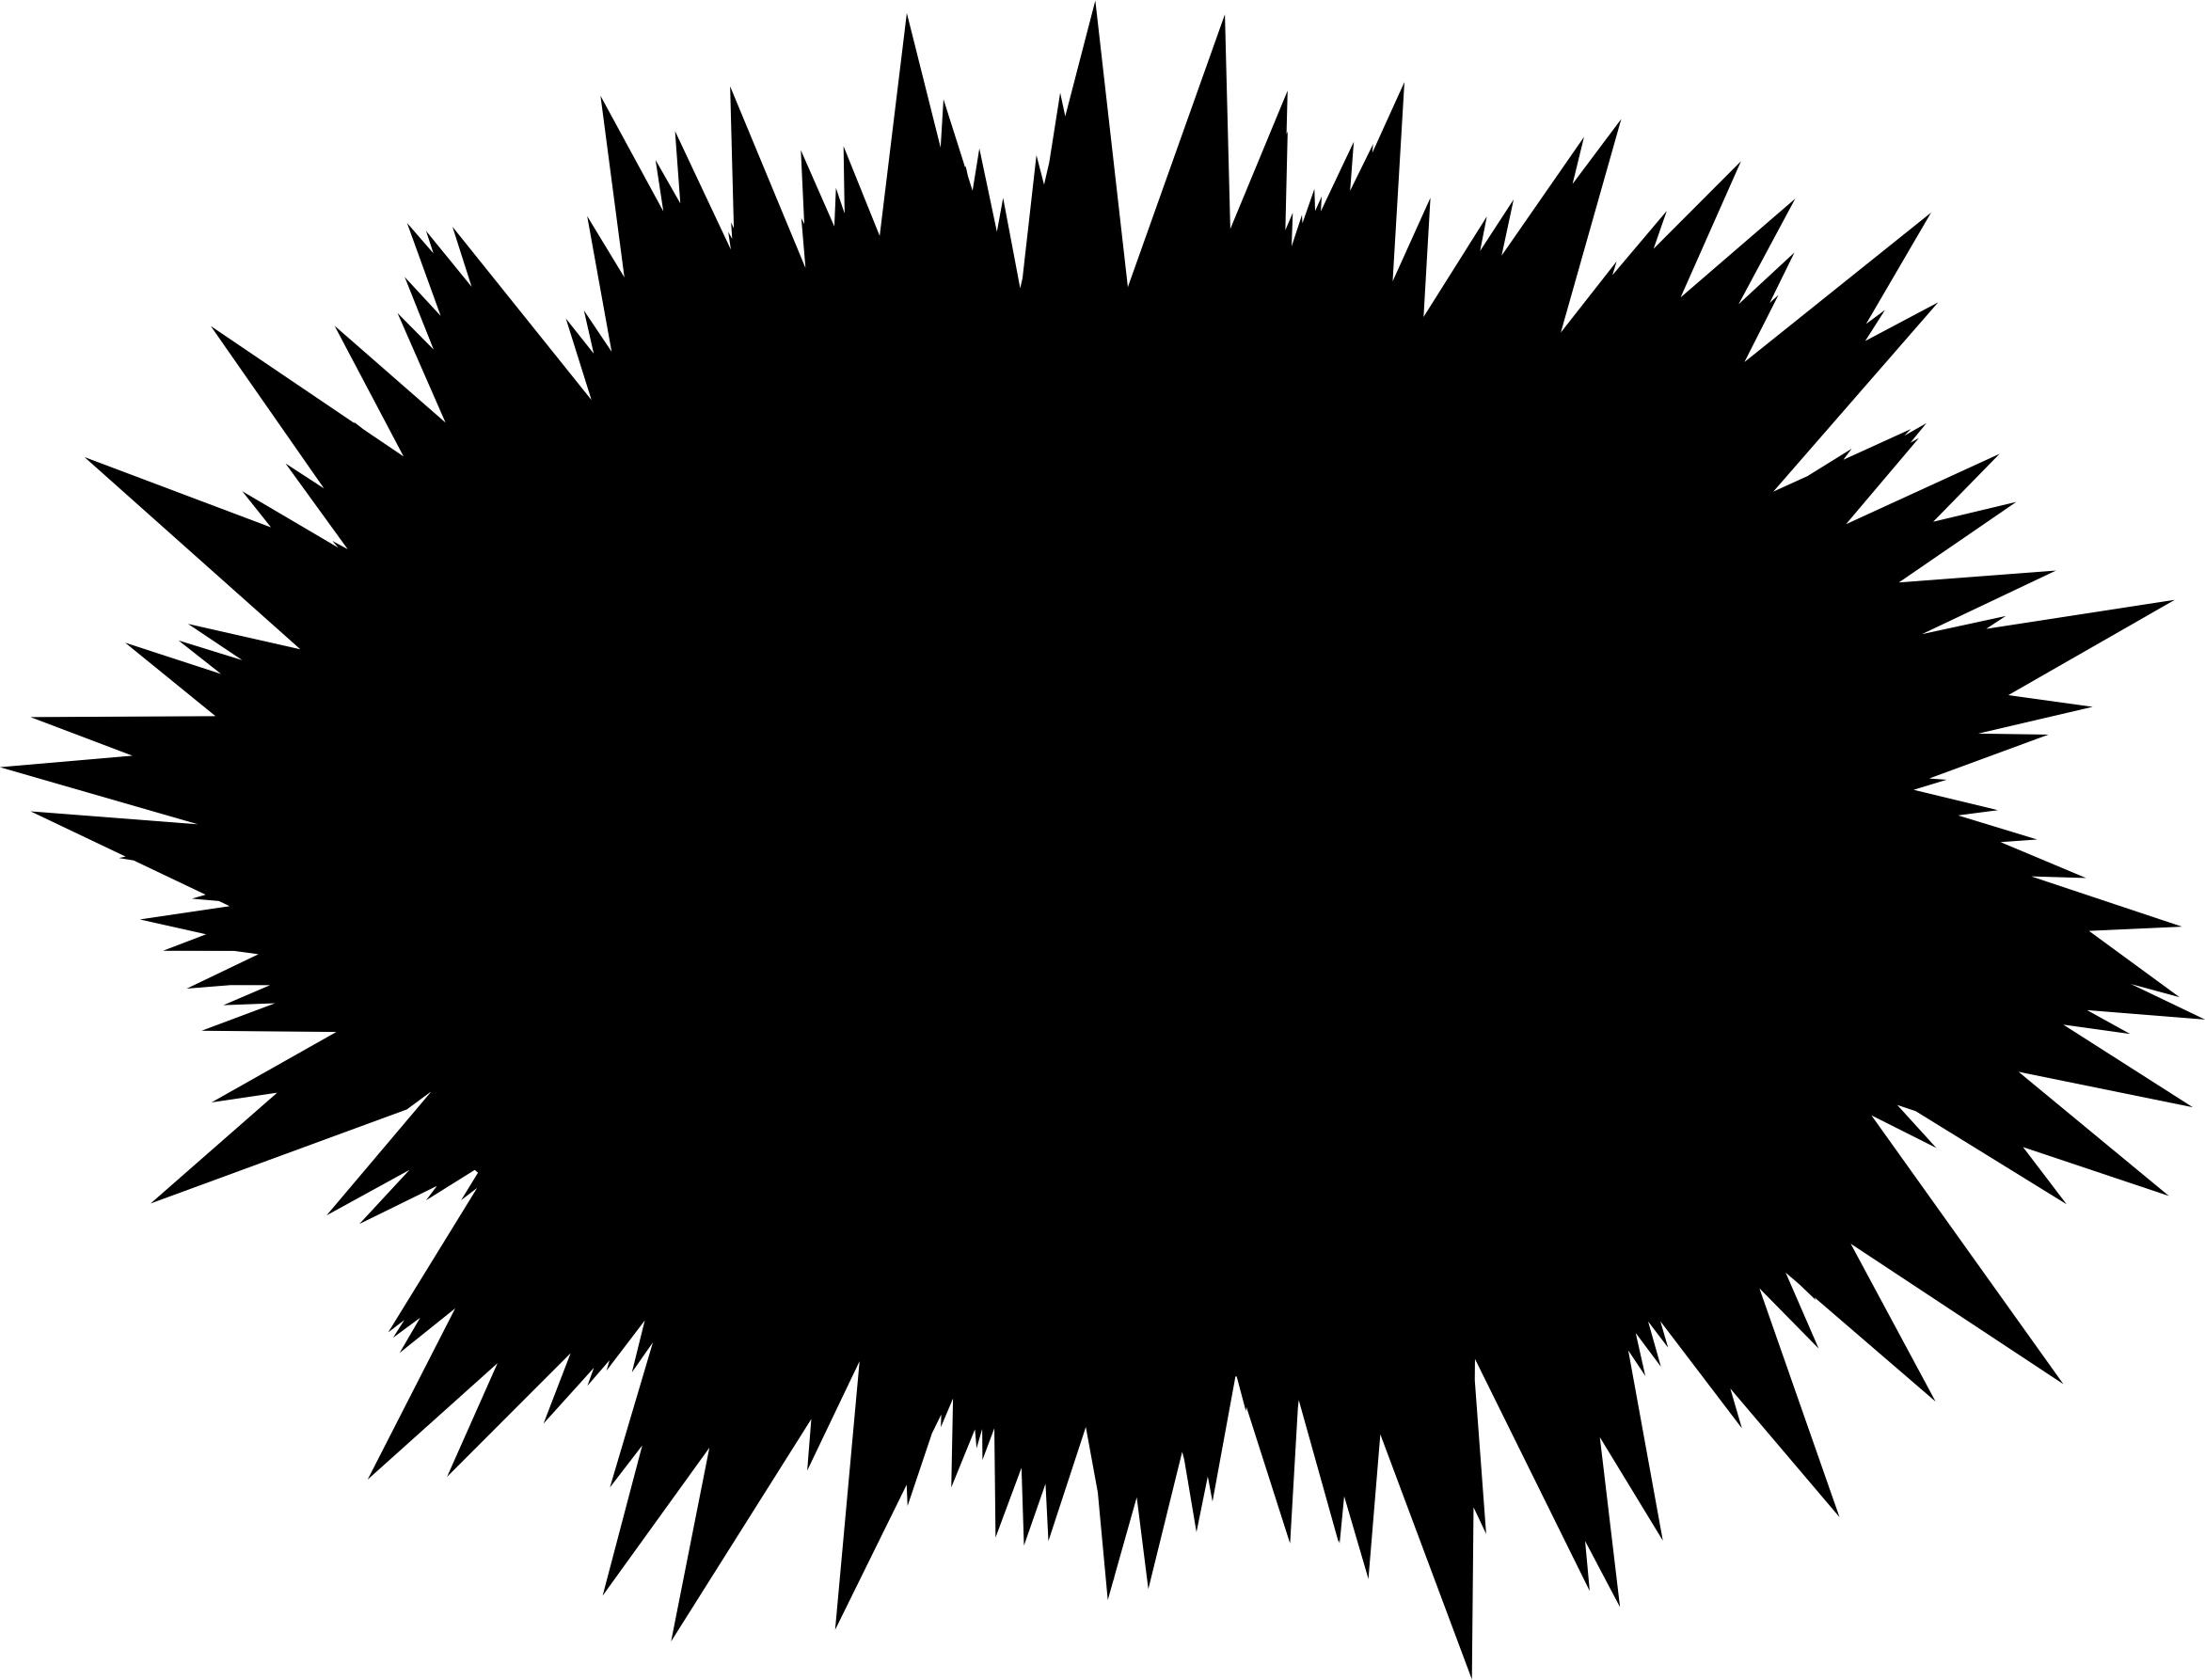 Spiky Shape Silhouette png